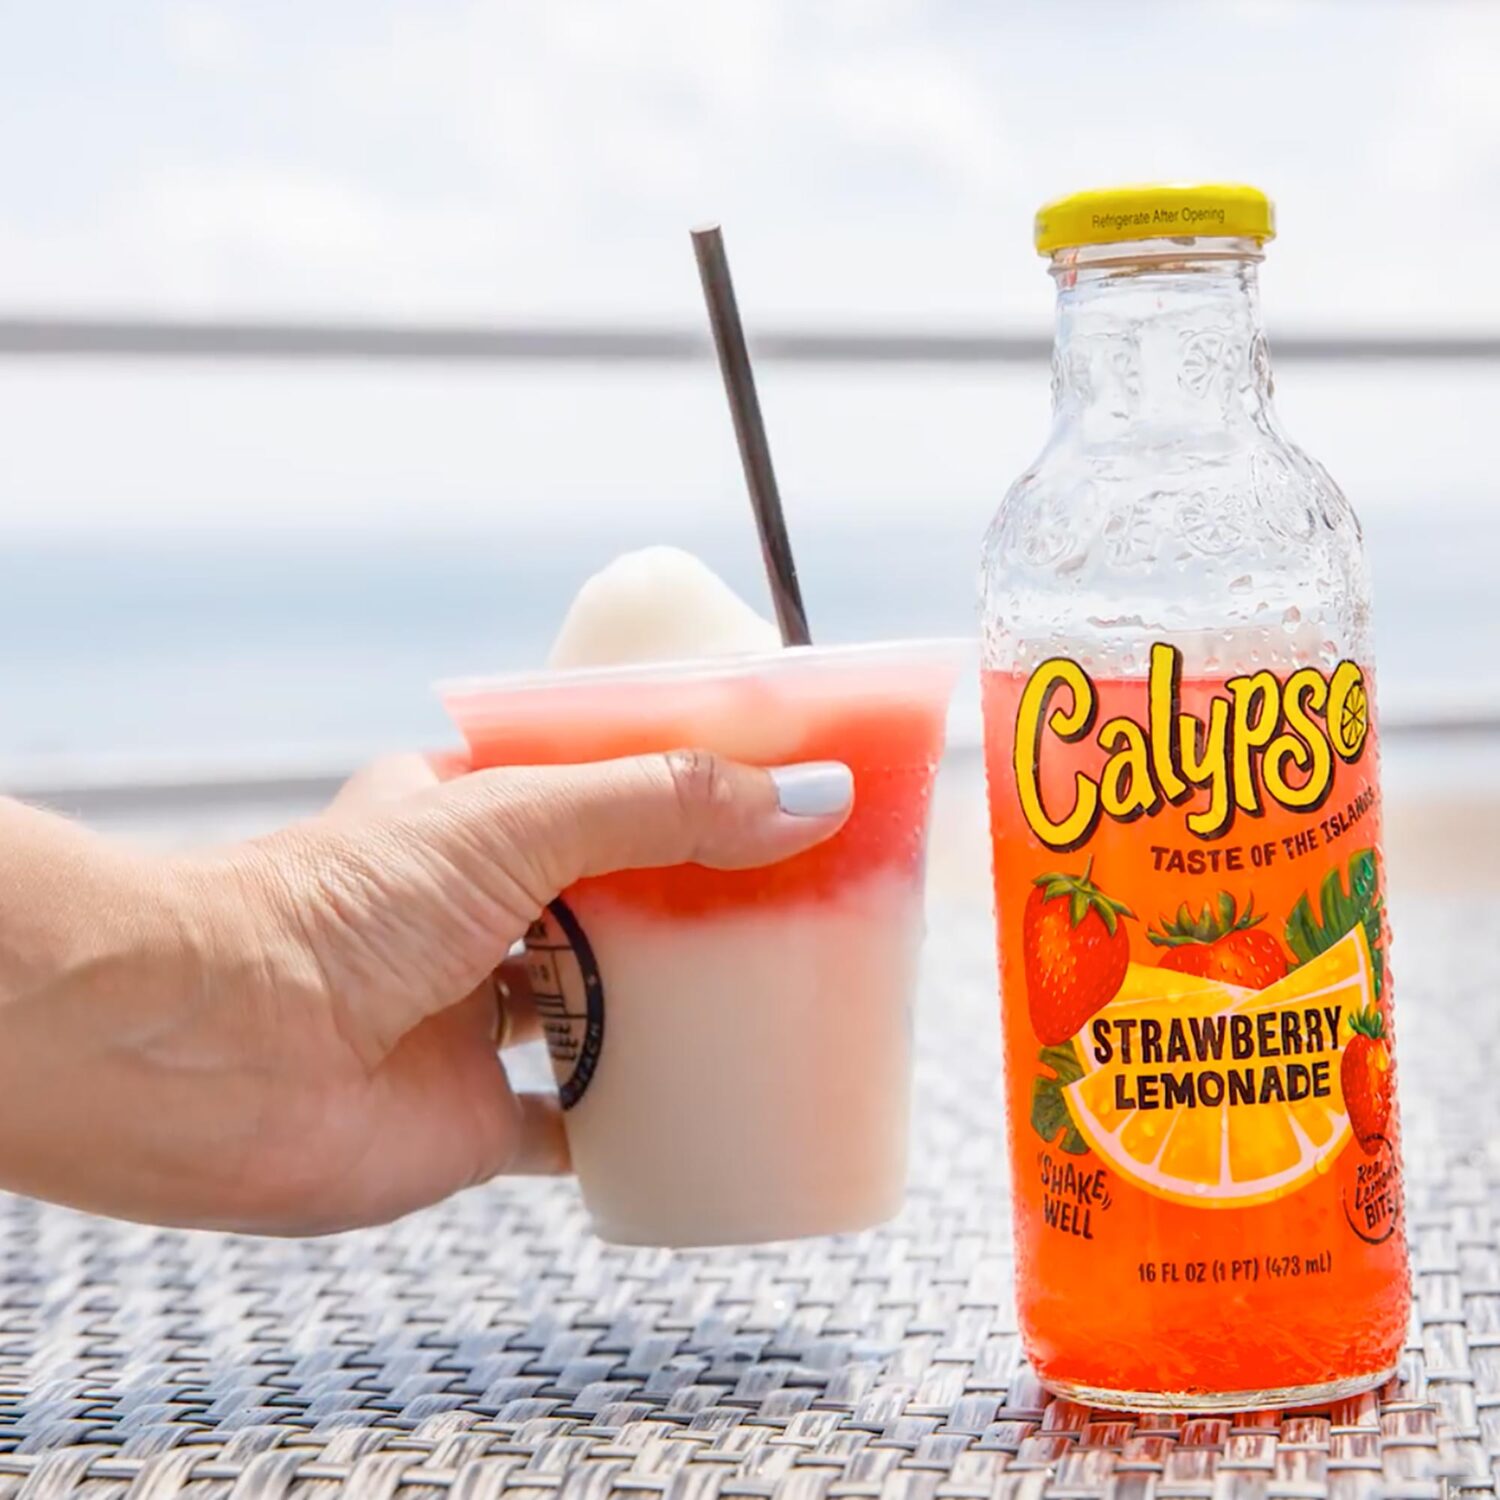 A person holding a frozen cocktail next to a bottle of Calypso Strawberry Lemonade.